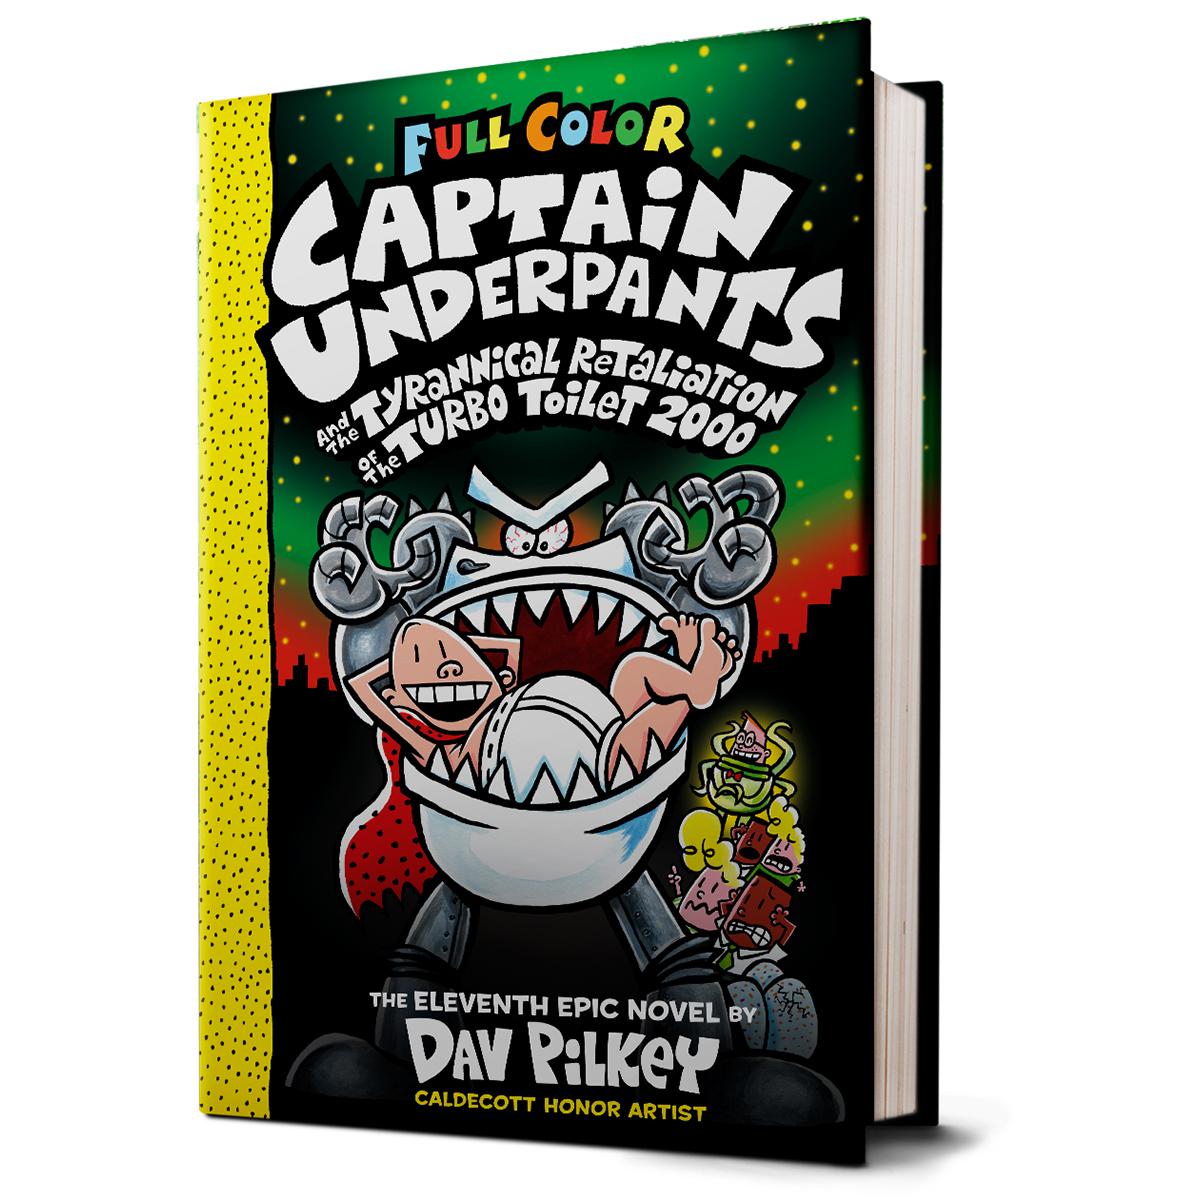  Captain Underpants and the Tyranical Retaliation of the Turbo Toilet 2000: Full Color